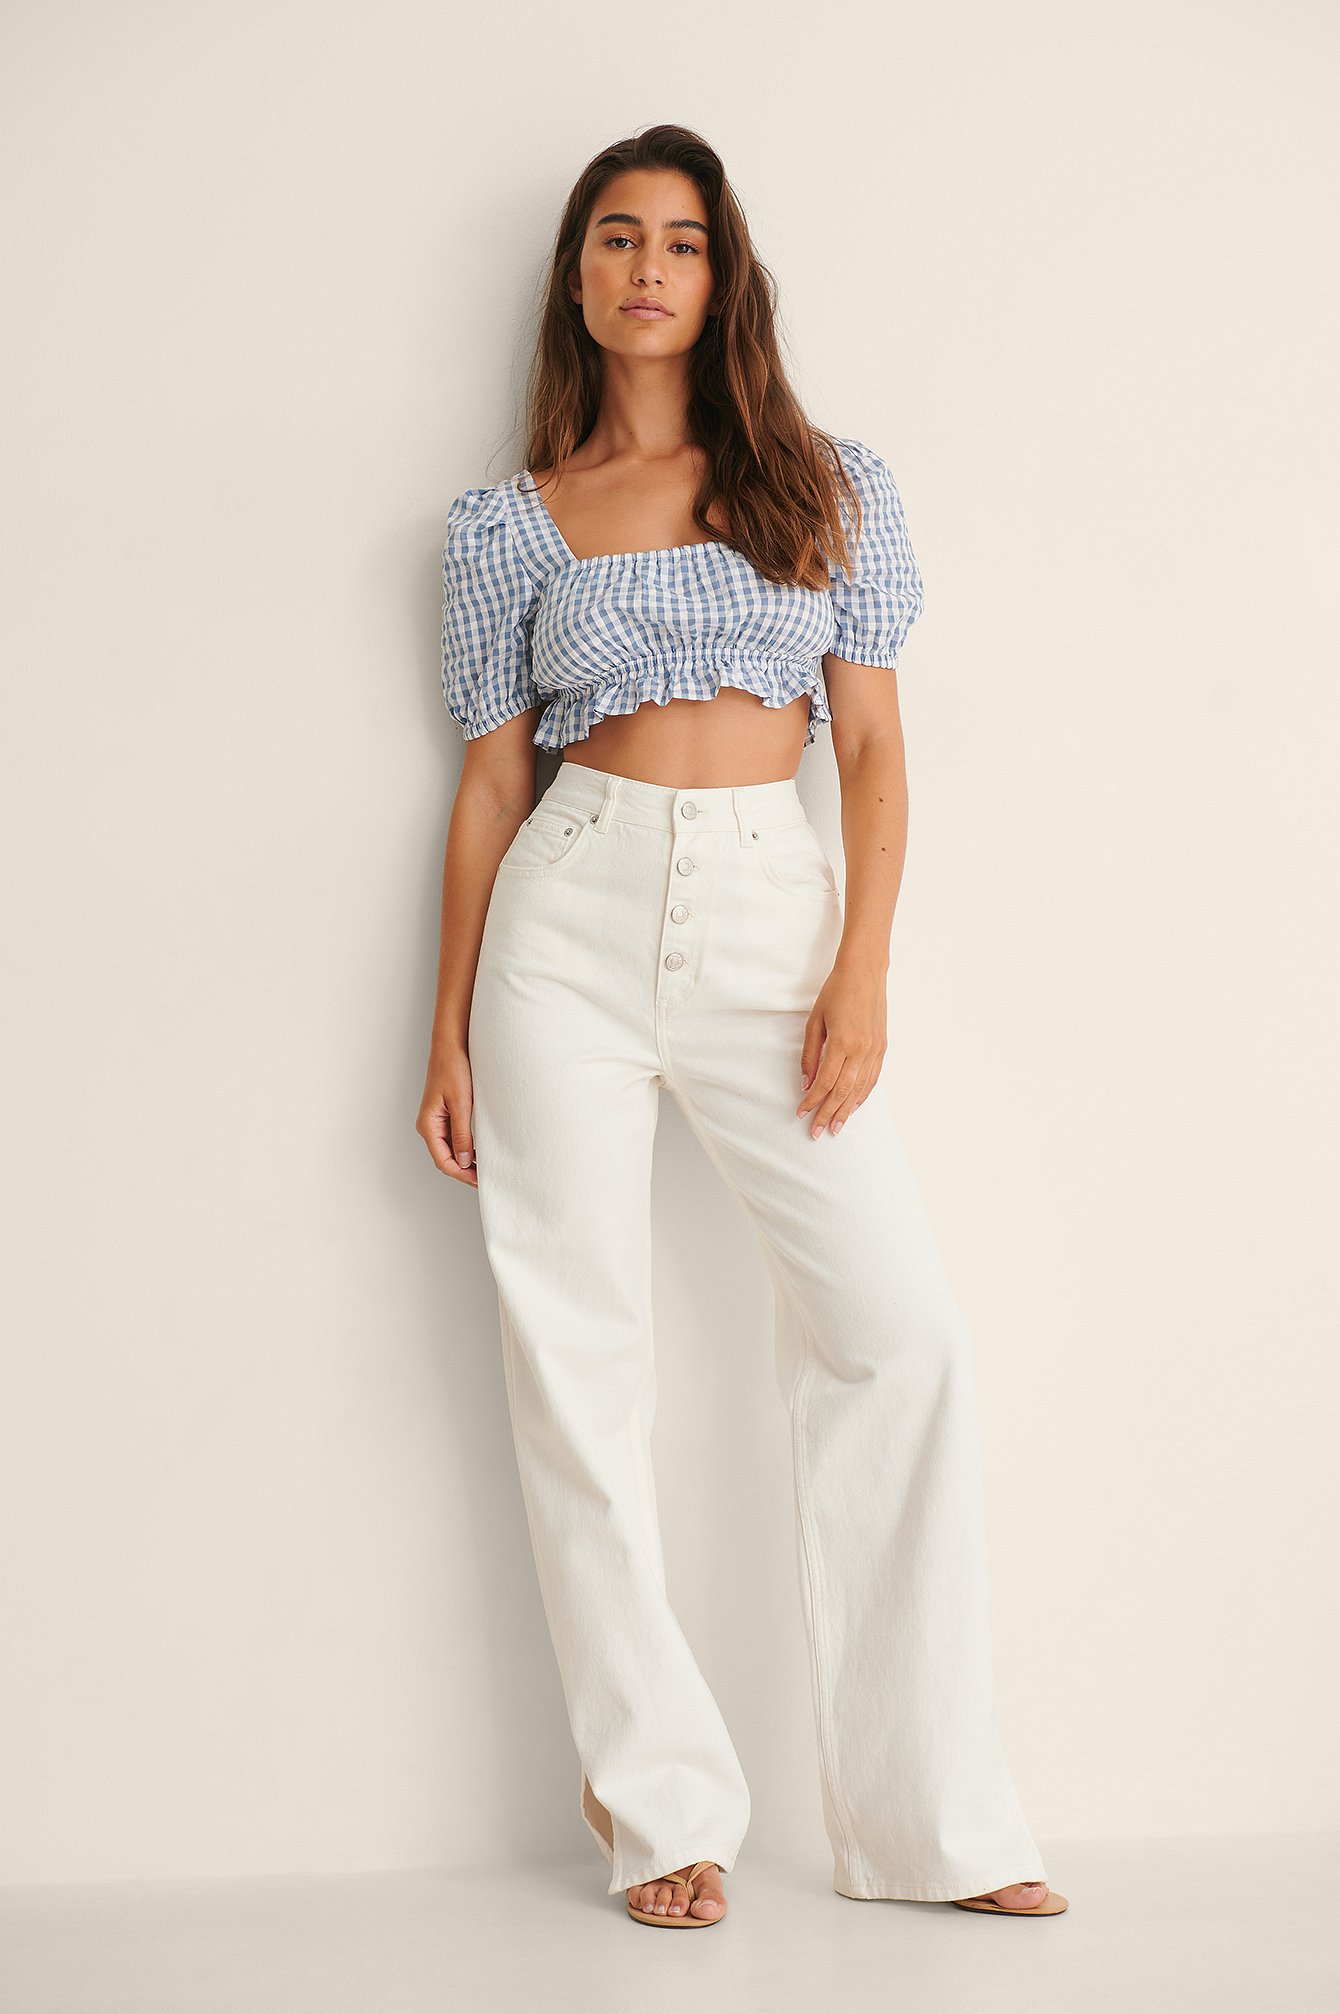 Gingham Cropped Top Outfit.